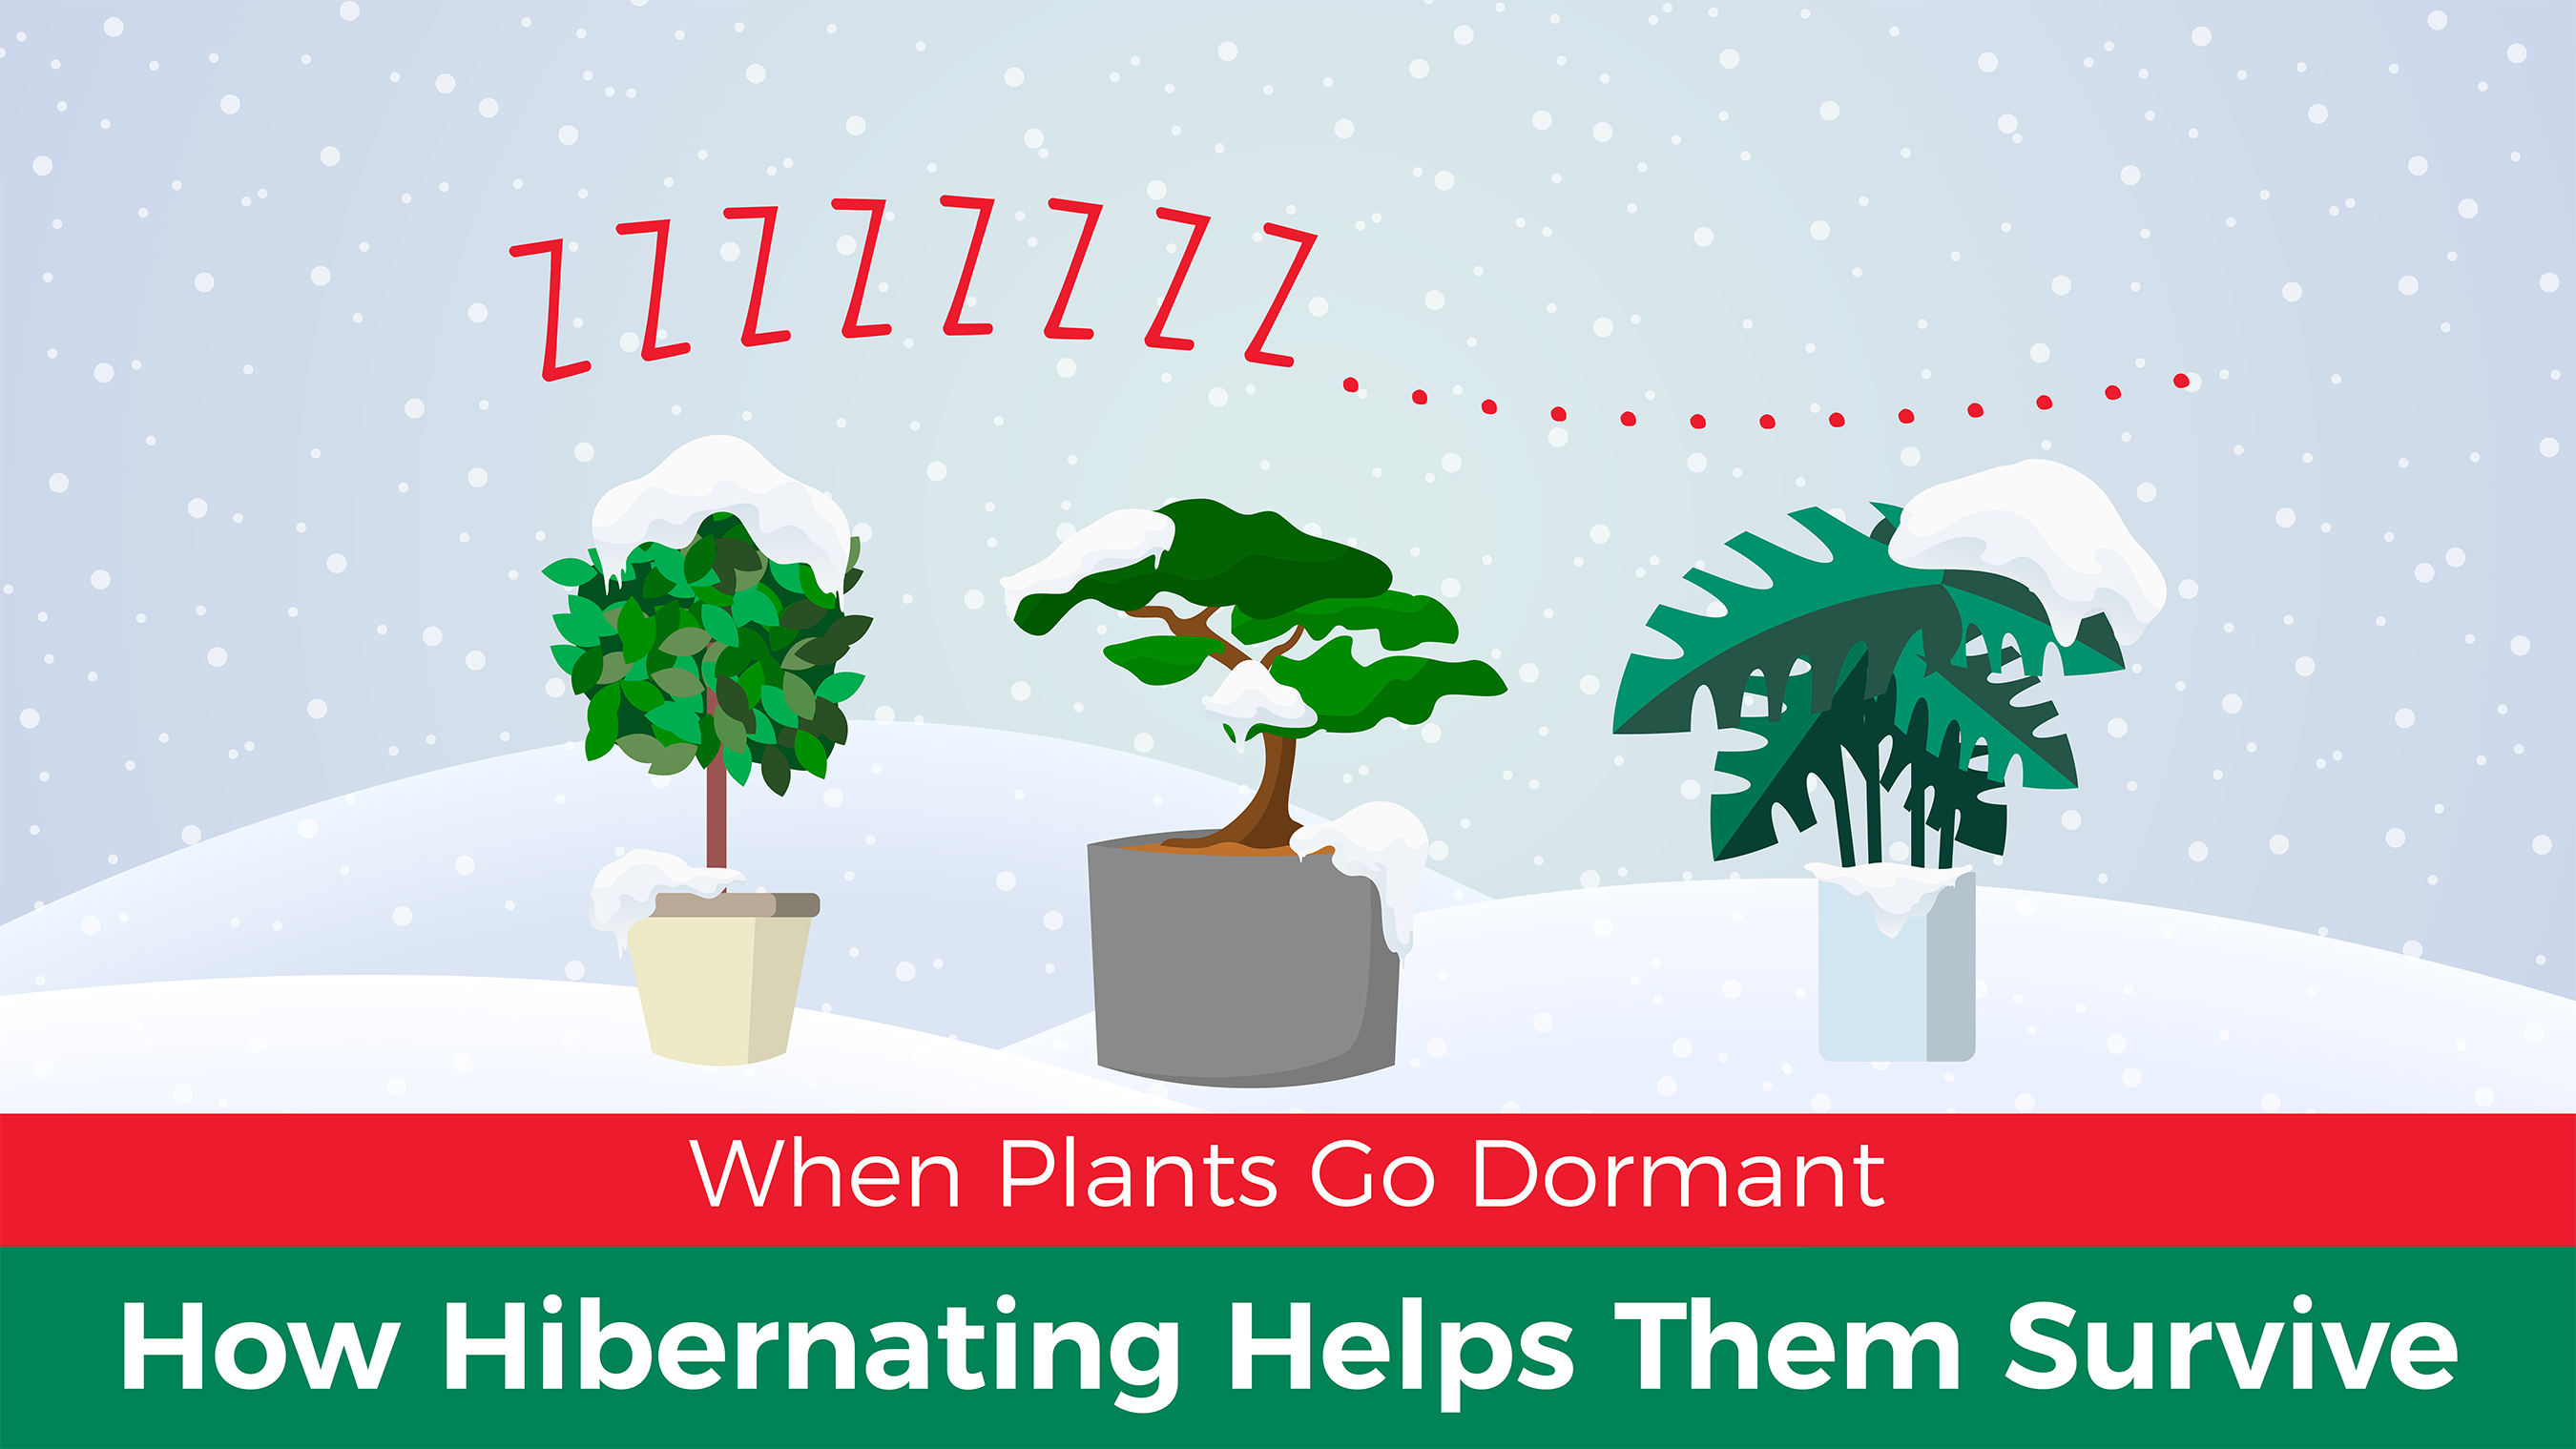 7 simple tips to prepare your plants for winter